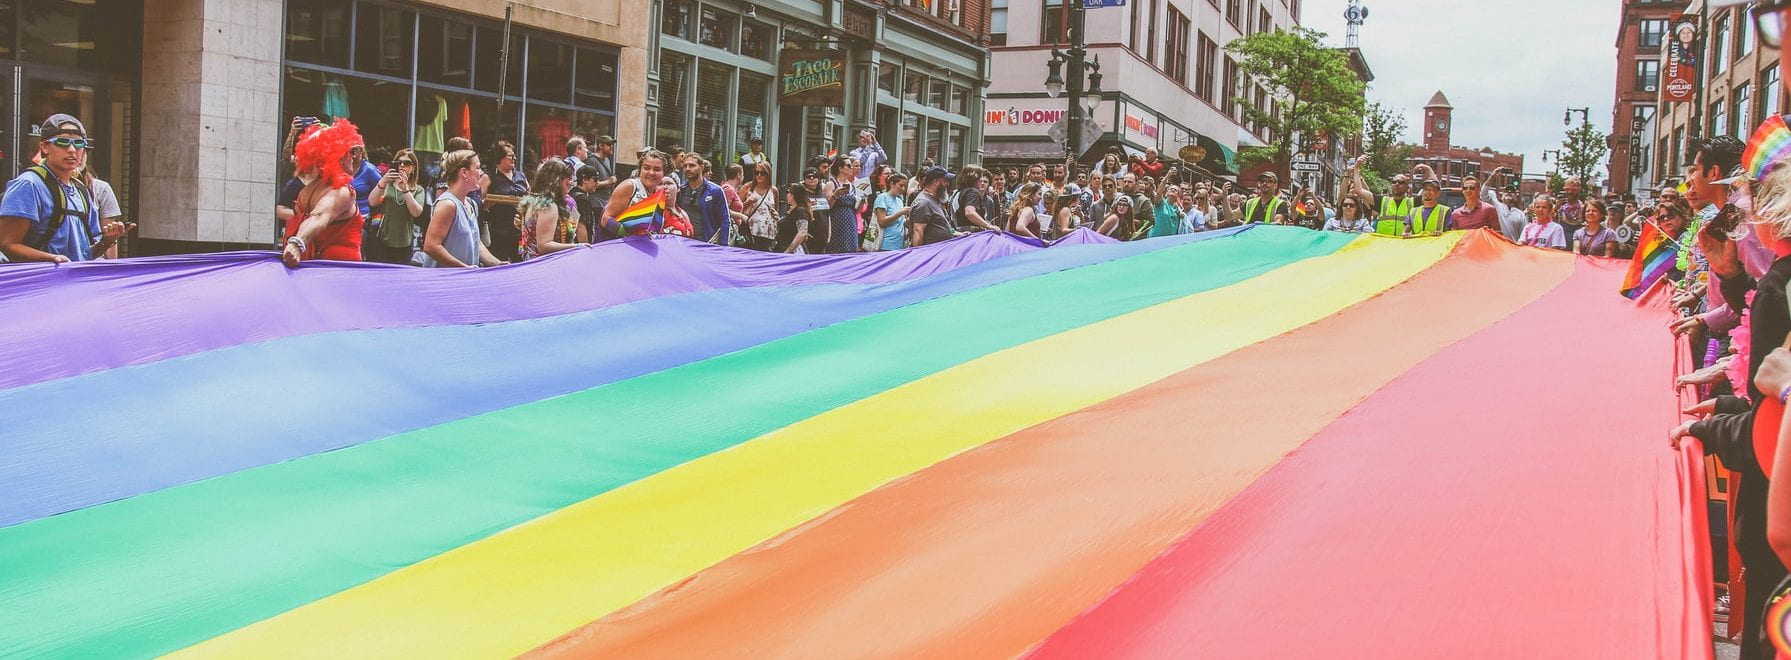 large rainbow flag being held by a large group of people in a city centre